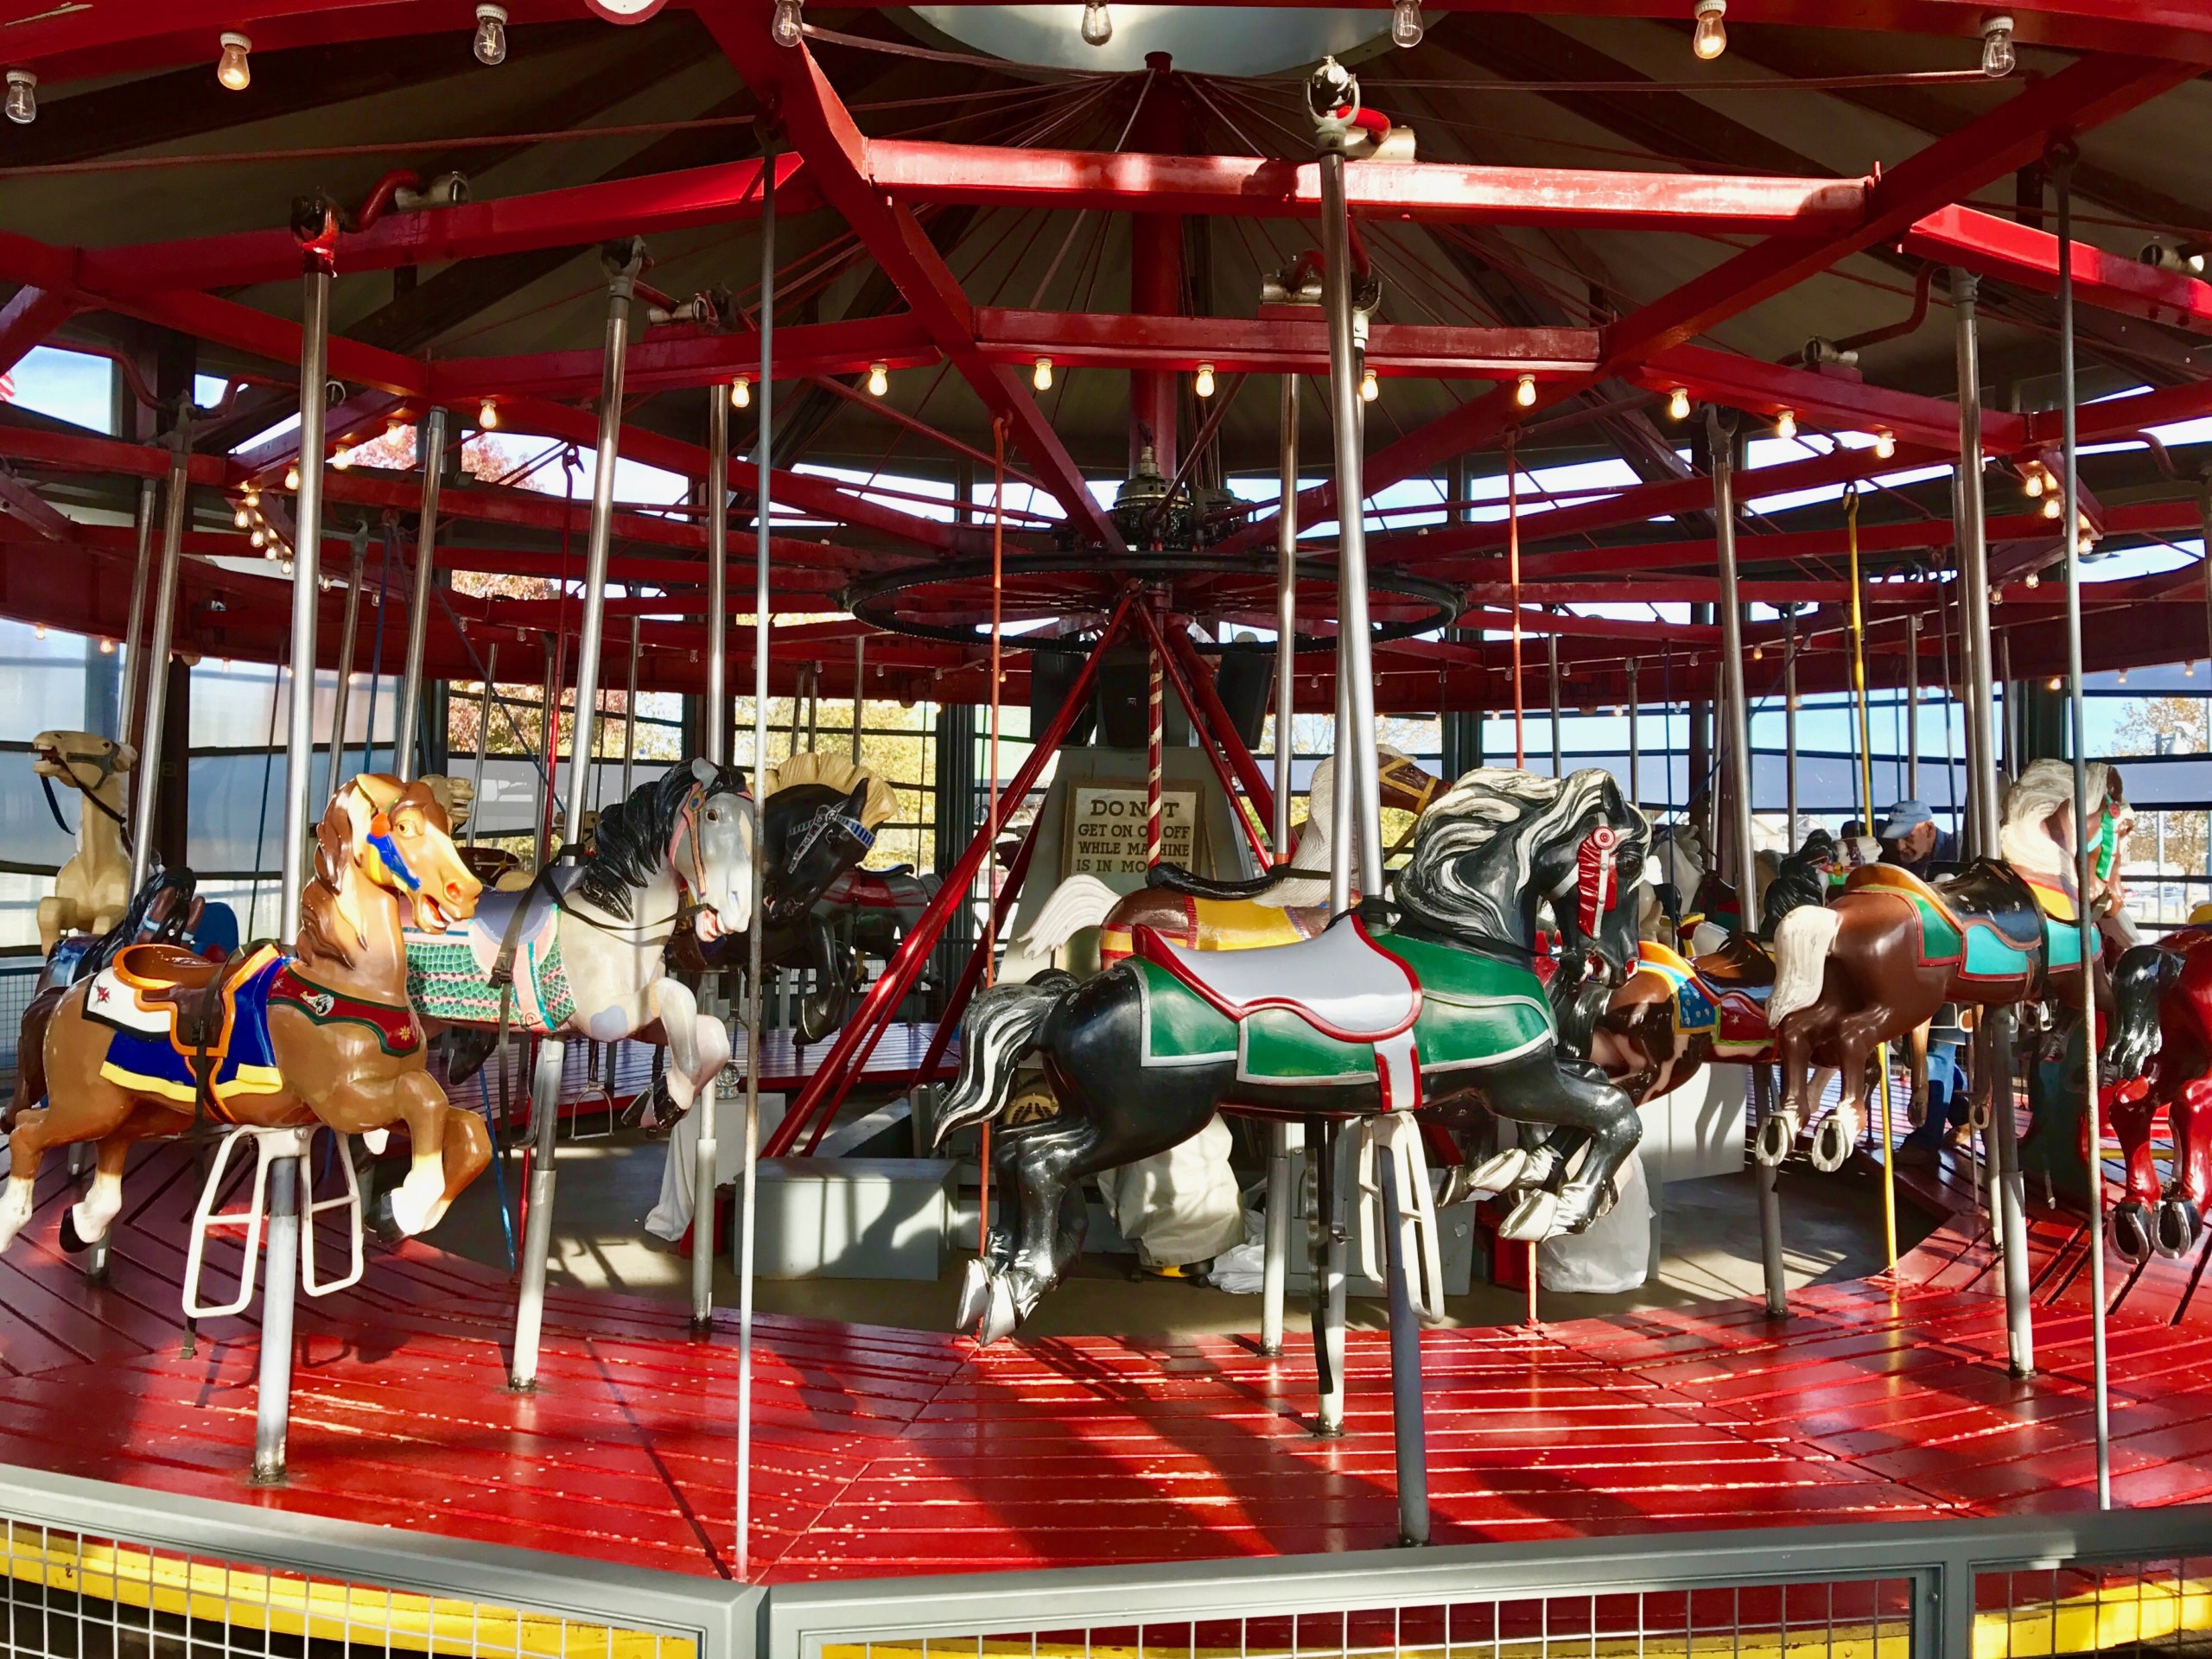 Greenport Carousel is fun for kids and the whole family